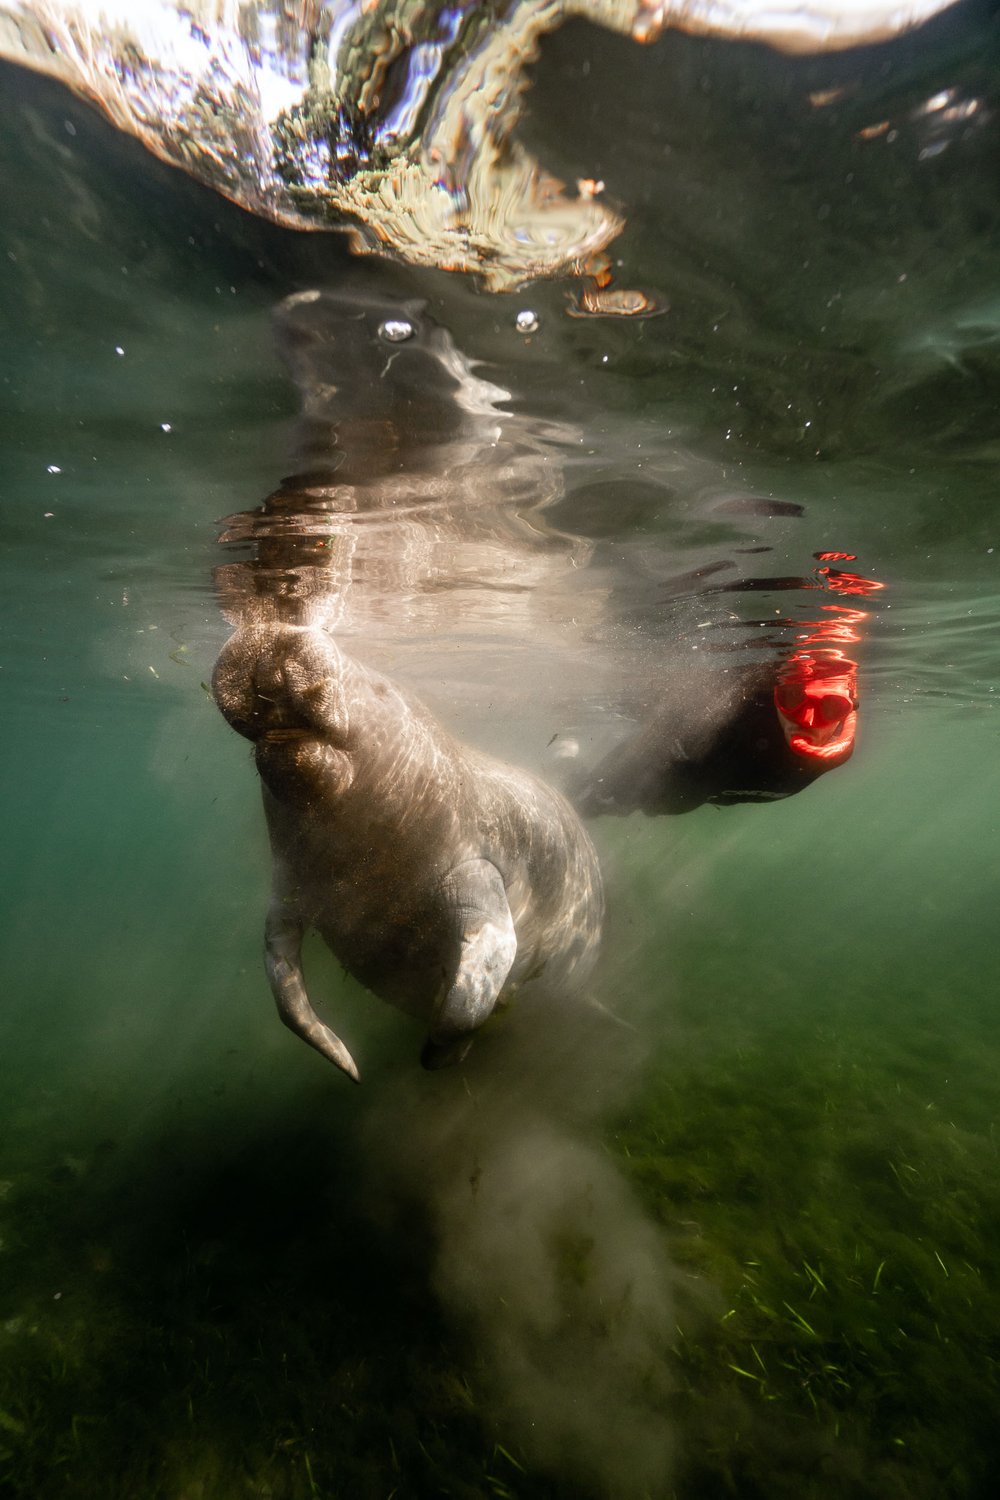 Underwater photo of a manatee and snorkeler